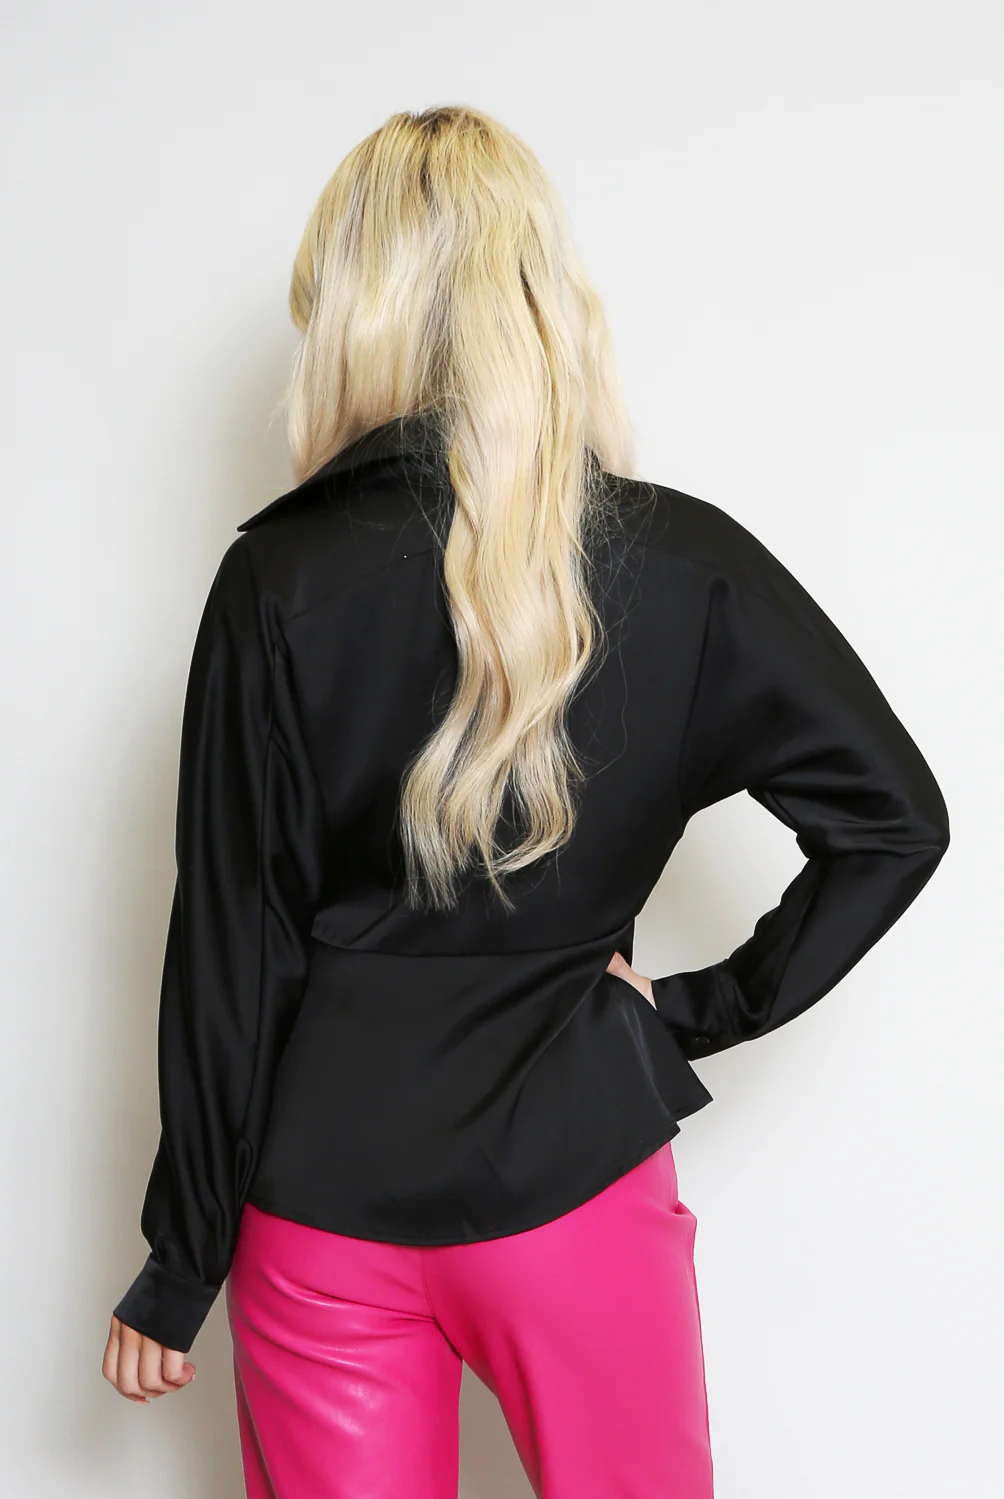 Top Blouse Black Crossover